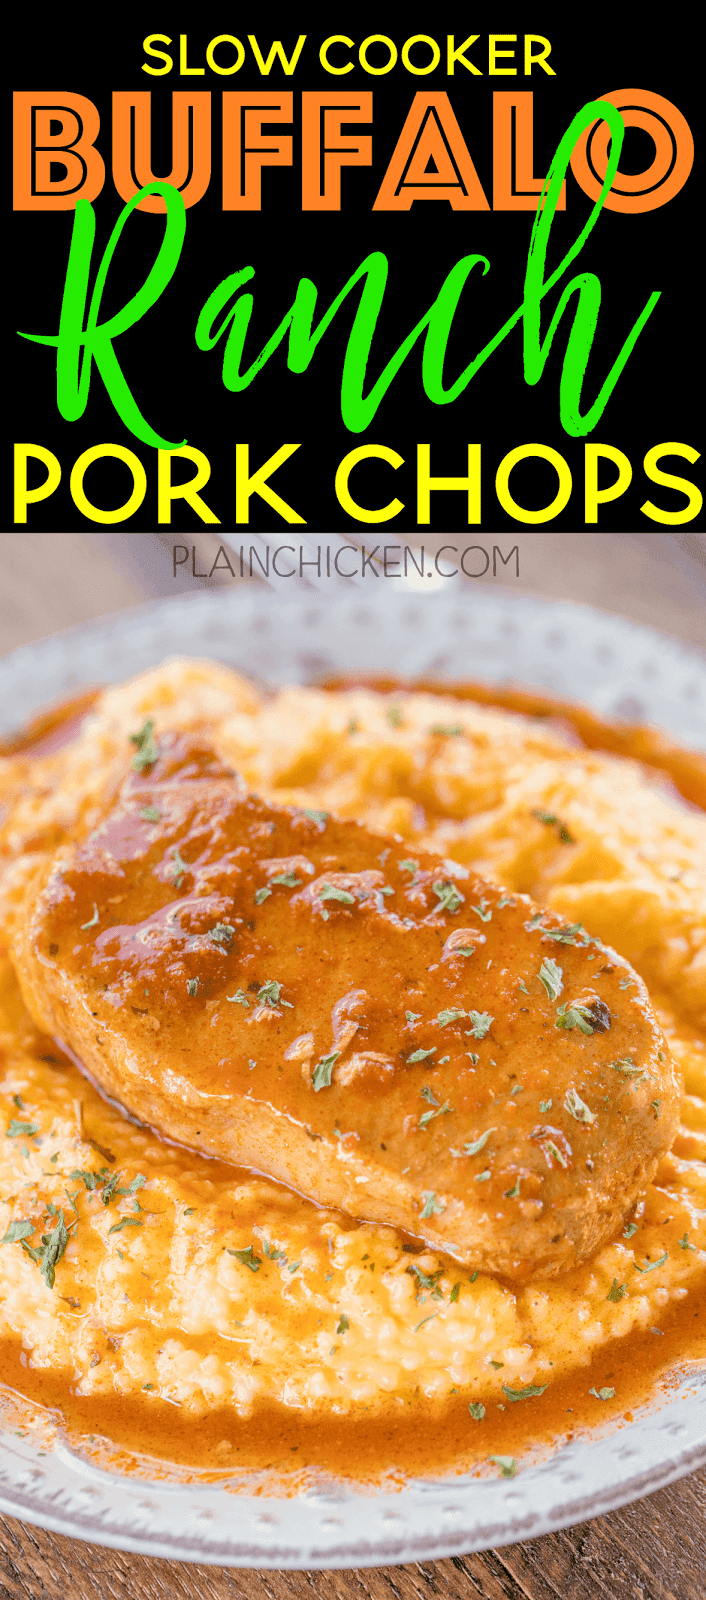 Slow Cooker Buffalo Ranch Pork Chops - only 3 ingredients! These are some of the best pork chops we've ever eaten! So simple and SOOOO good!!!! Everyone cleaned their plate! Great for watching football! Serve over cheddar ranch grits! TO-DIE-FOR! YUM!